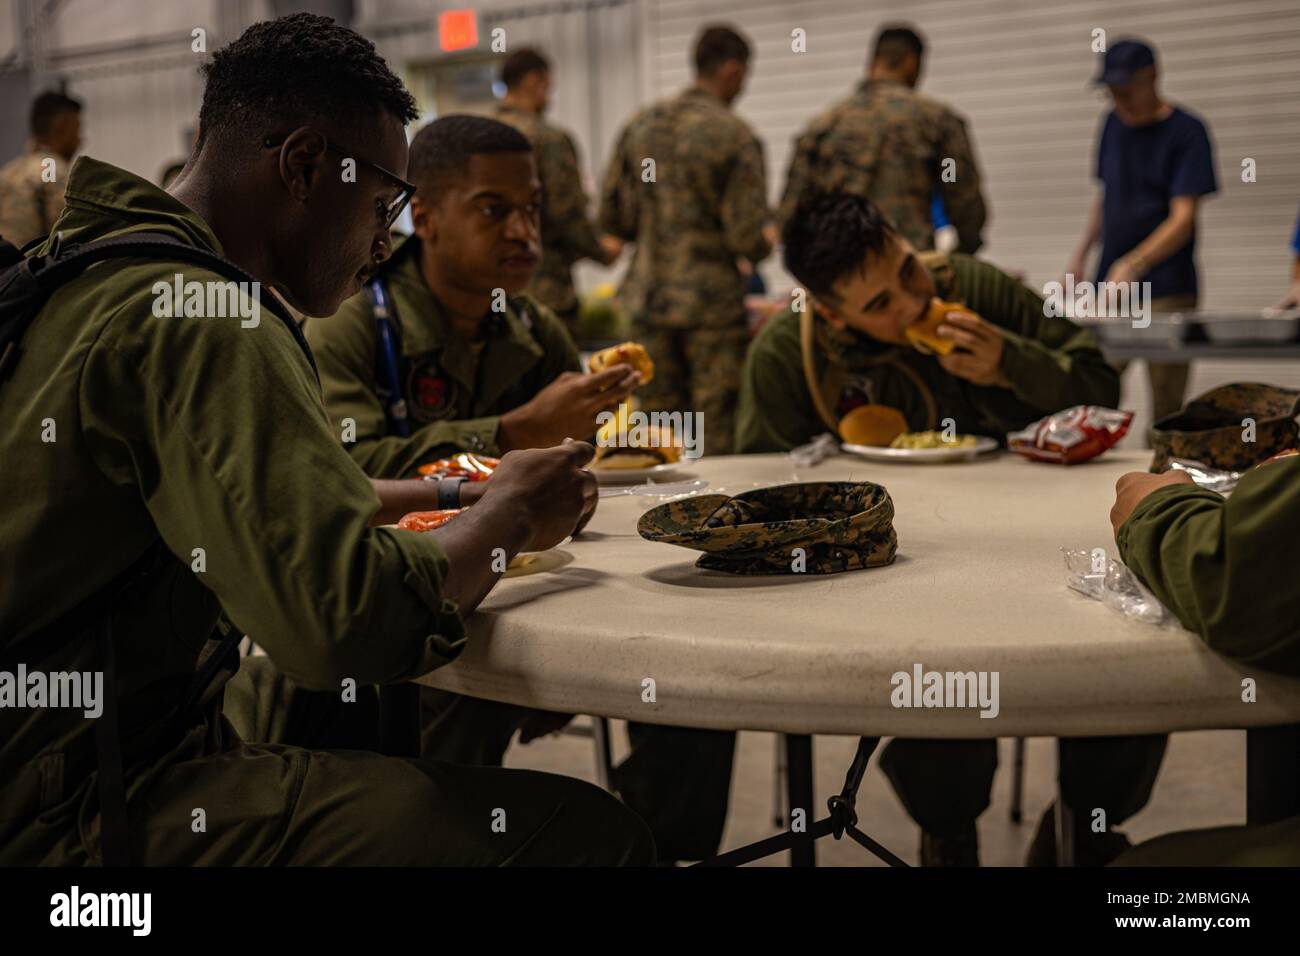 U.S. Marines with Marine Light Attack Helicopter Squadron (HMLA) 773 Detachment A, 4th Marine Aircraft Wing, eat hamburgers and hot dogs that are provided by Veterans of Foreign Wars (VFW) Post 1432 at Salina, Kansas on June 17, 2022. The VFW traces its roots back to 1899 when veterans of the Spanish-American War (1898) and the Philippine Insurrection (1899-1902) founded local organizations to secure rights and benefits for their service. Stock Photo